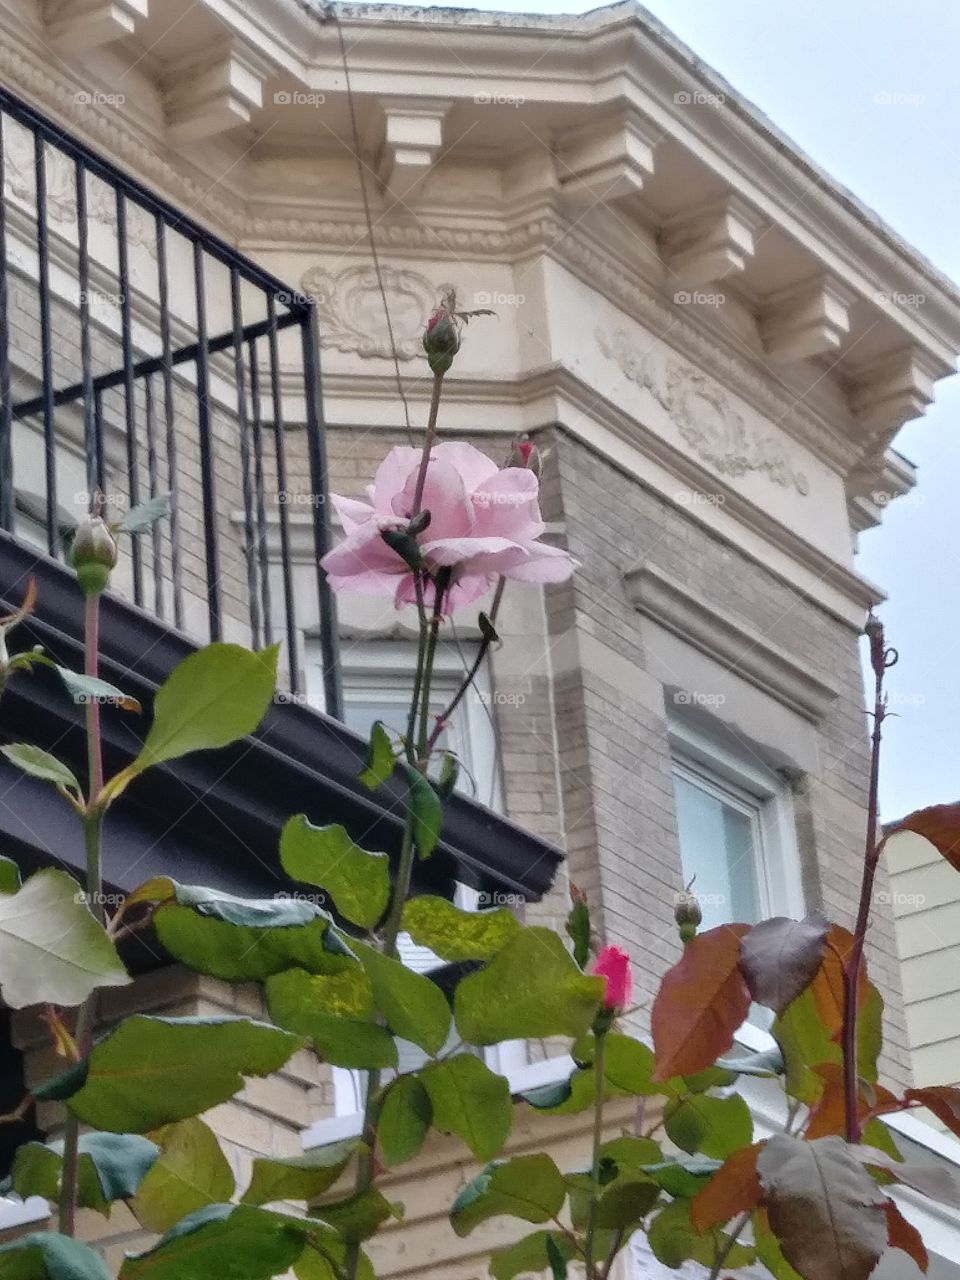 brooklyn rose infront of house day